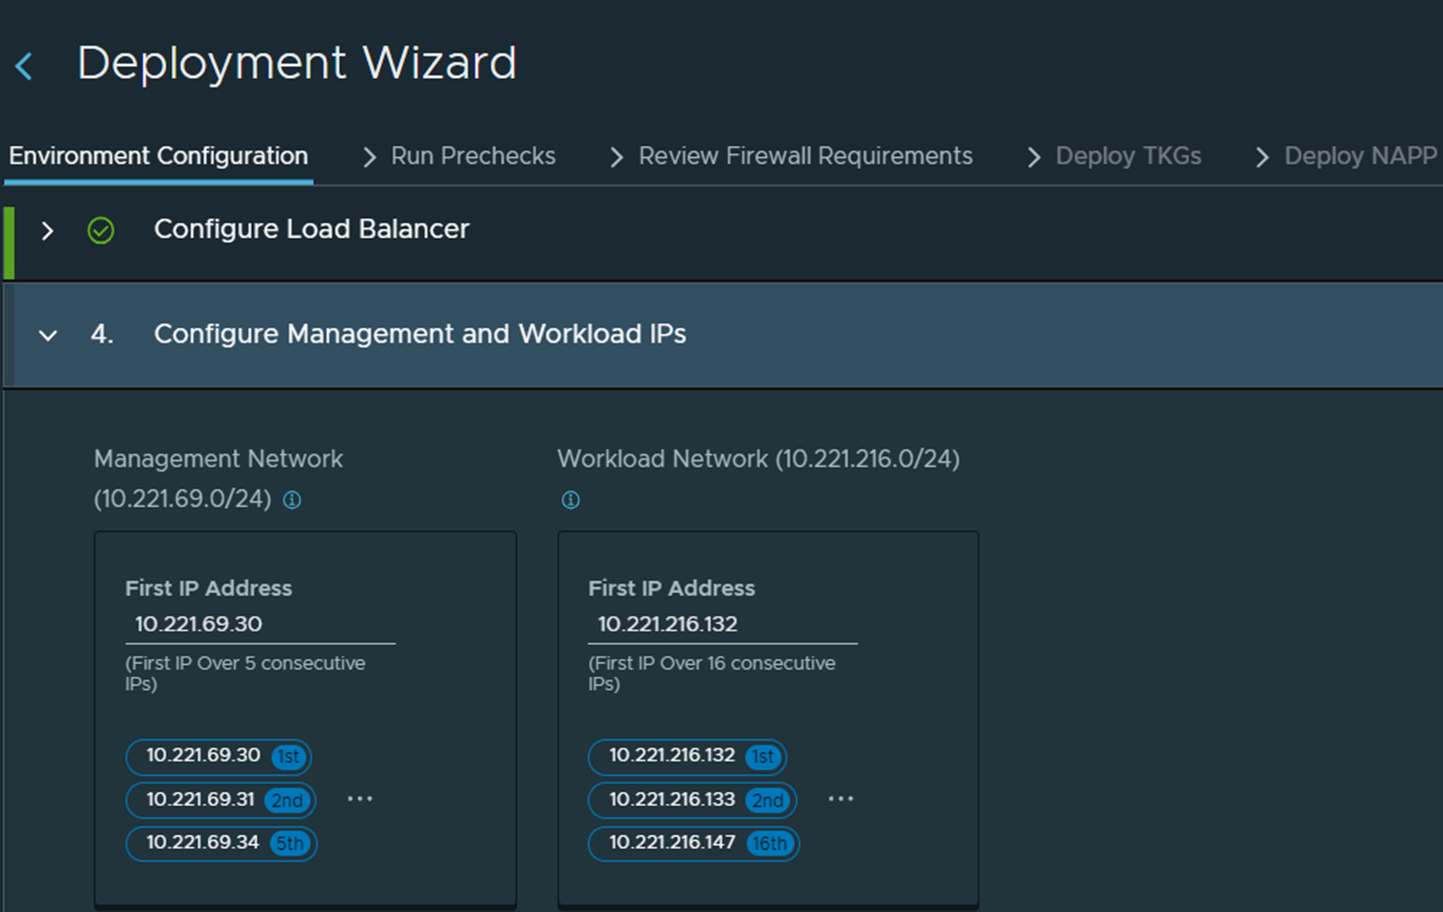 IP address configuration for Management and Workload network settings.